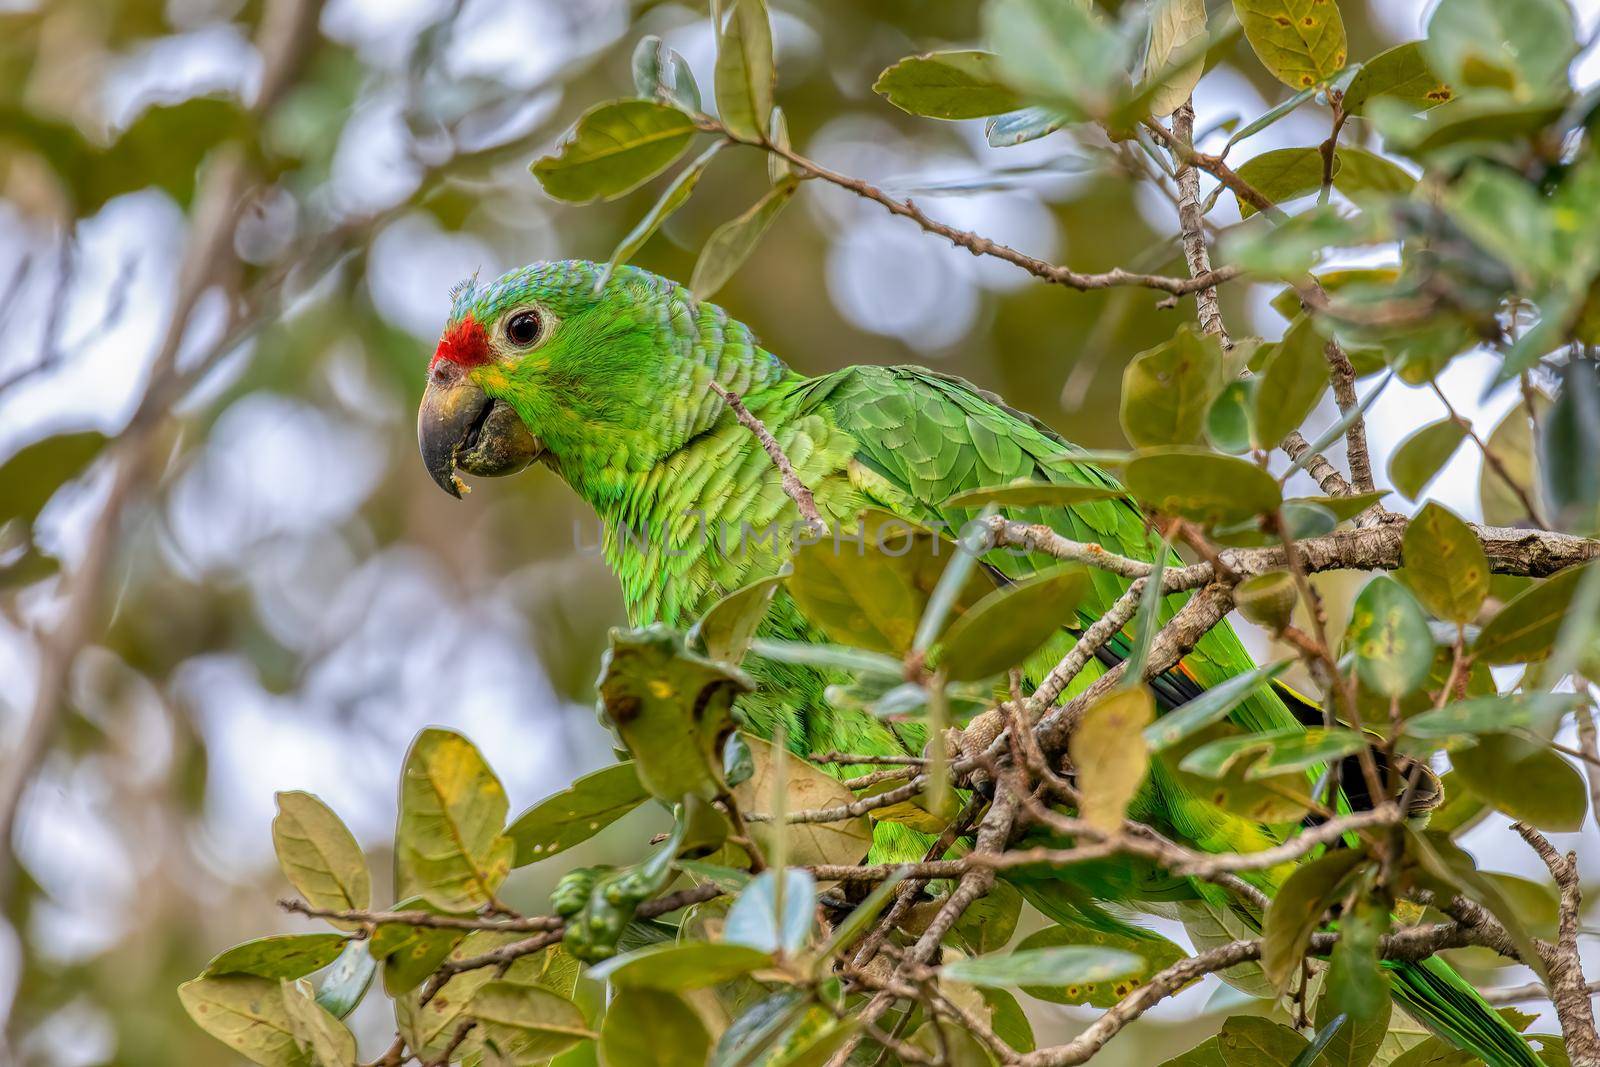 Red-lored amazon or red-lored parrot (Amazona autumnalis) is a species of amazon parrot feeding on tree, Curubande, Wildlife and birdwatching in Costa Rica.